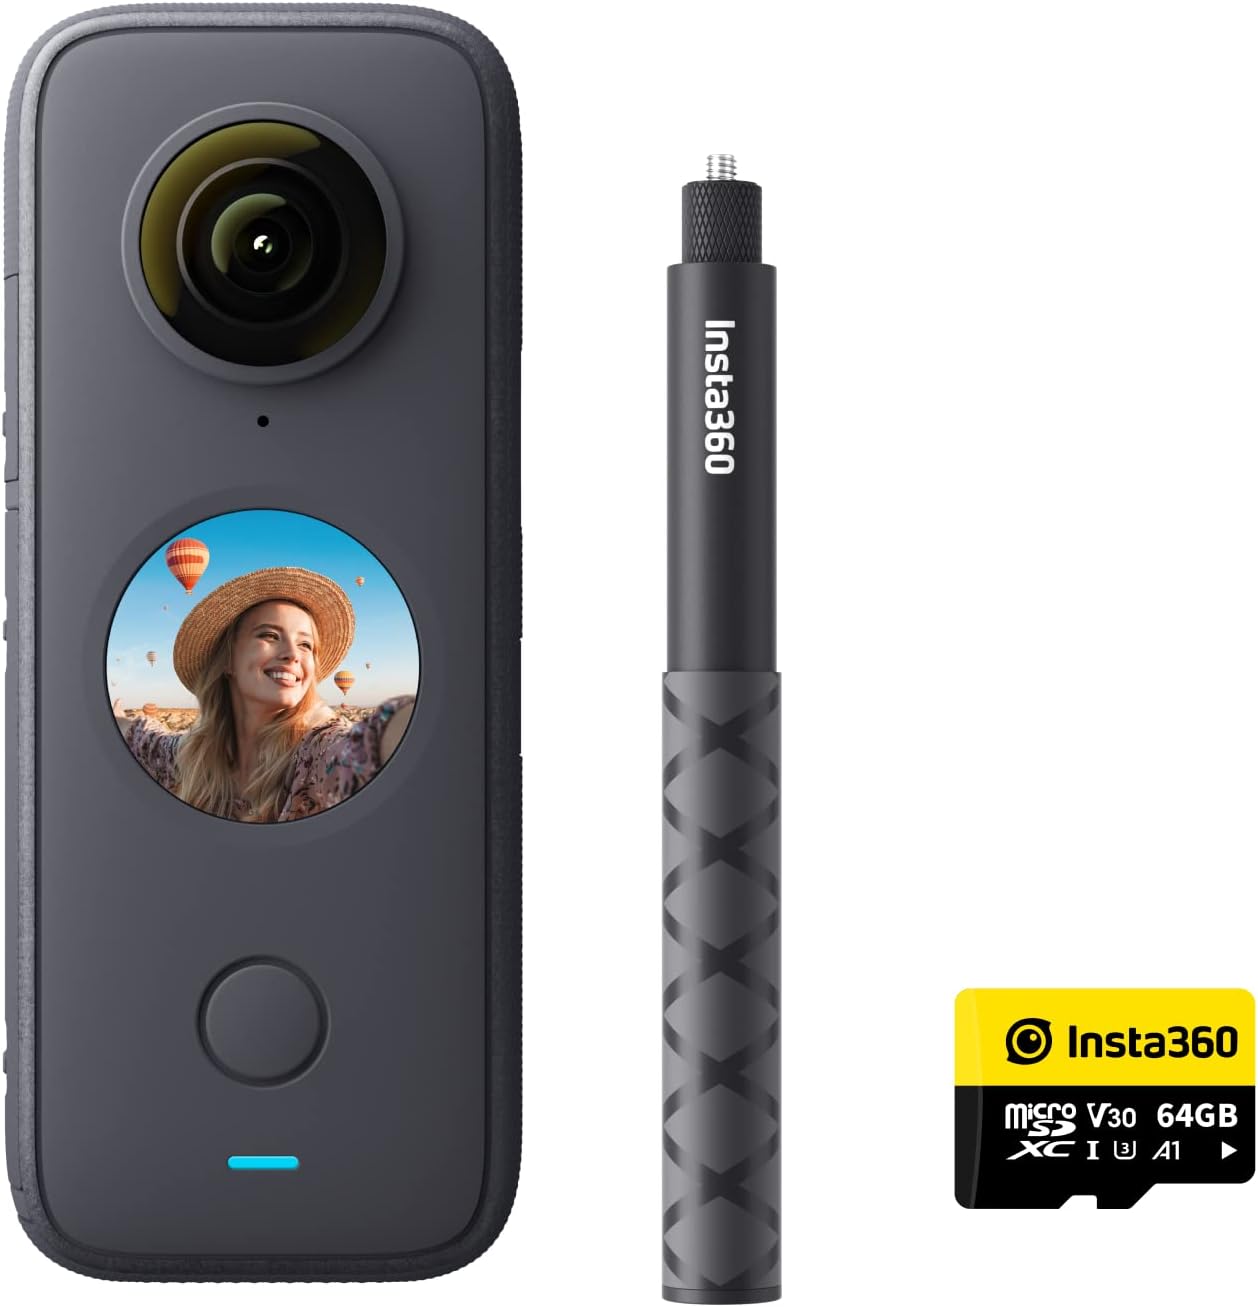 Review of Insta360 ONE X2 Construction Kit